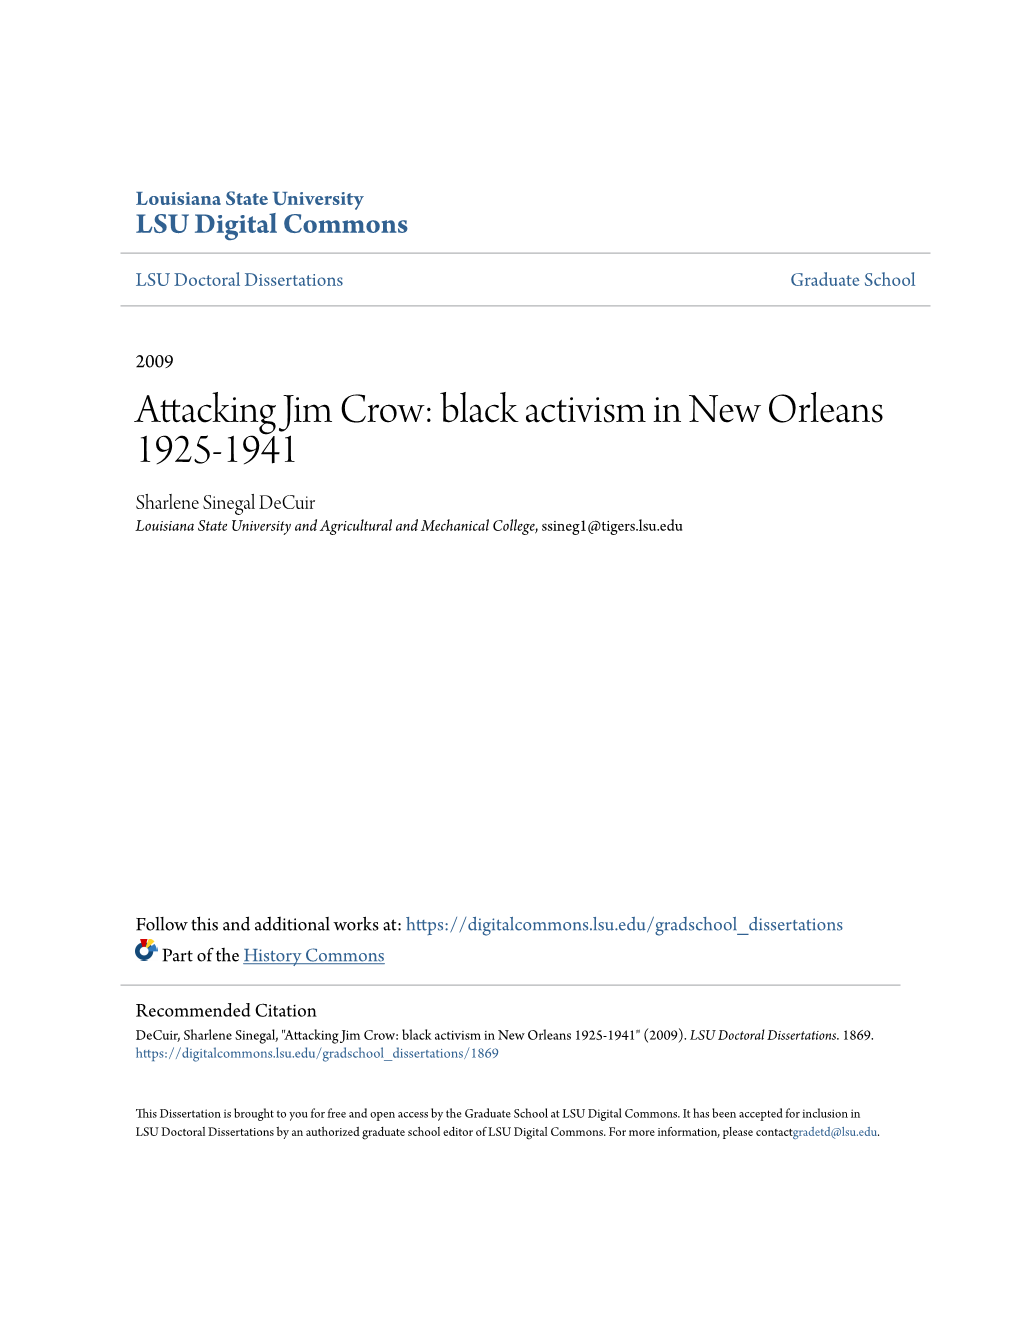 Attacking Jim Crow: Black Activism in New Orleans 1925-1941